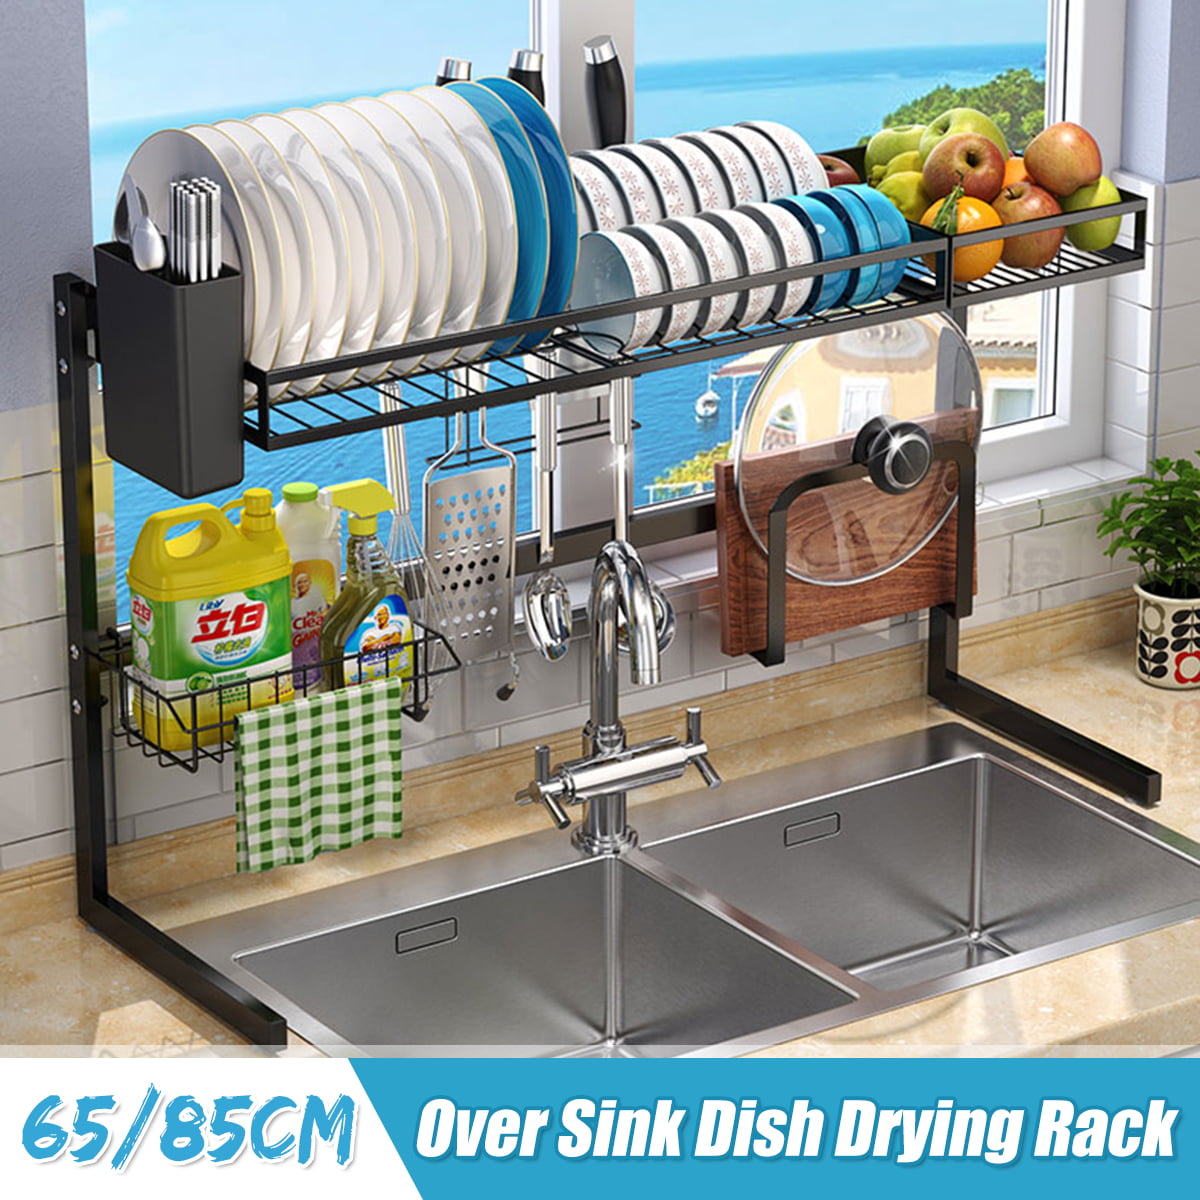 Over Sink Dish Drying Rack Drainer Shelf Stainless Steel Cutlery Holder Kitchen 